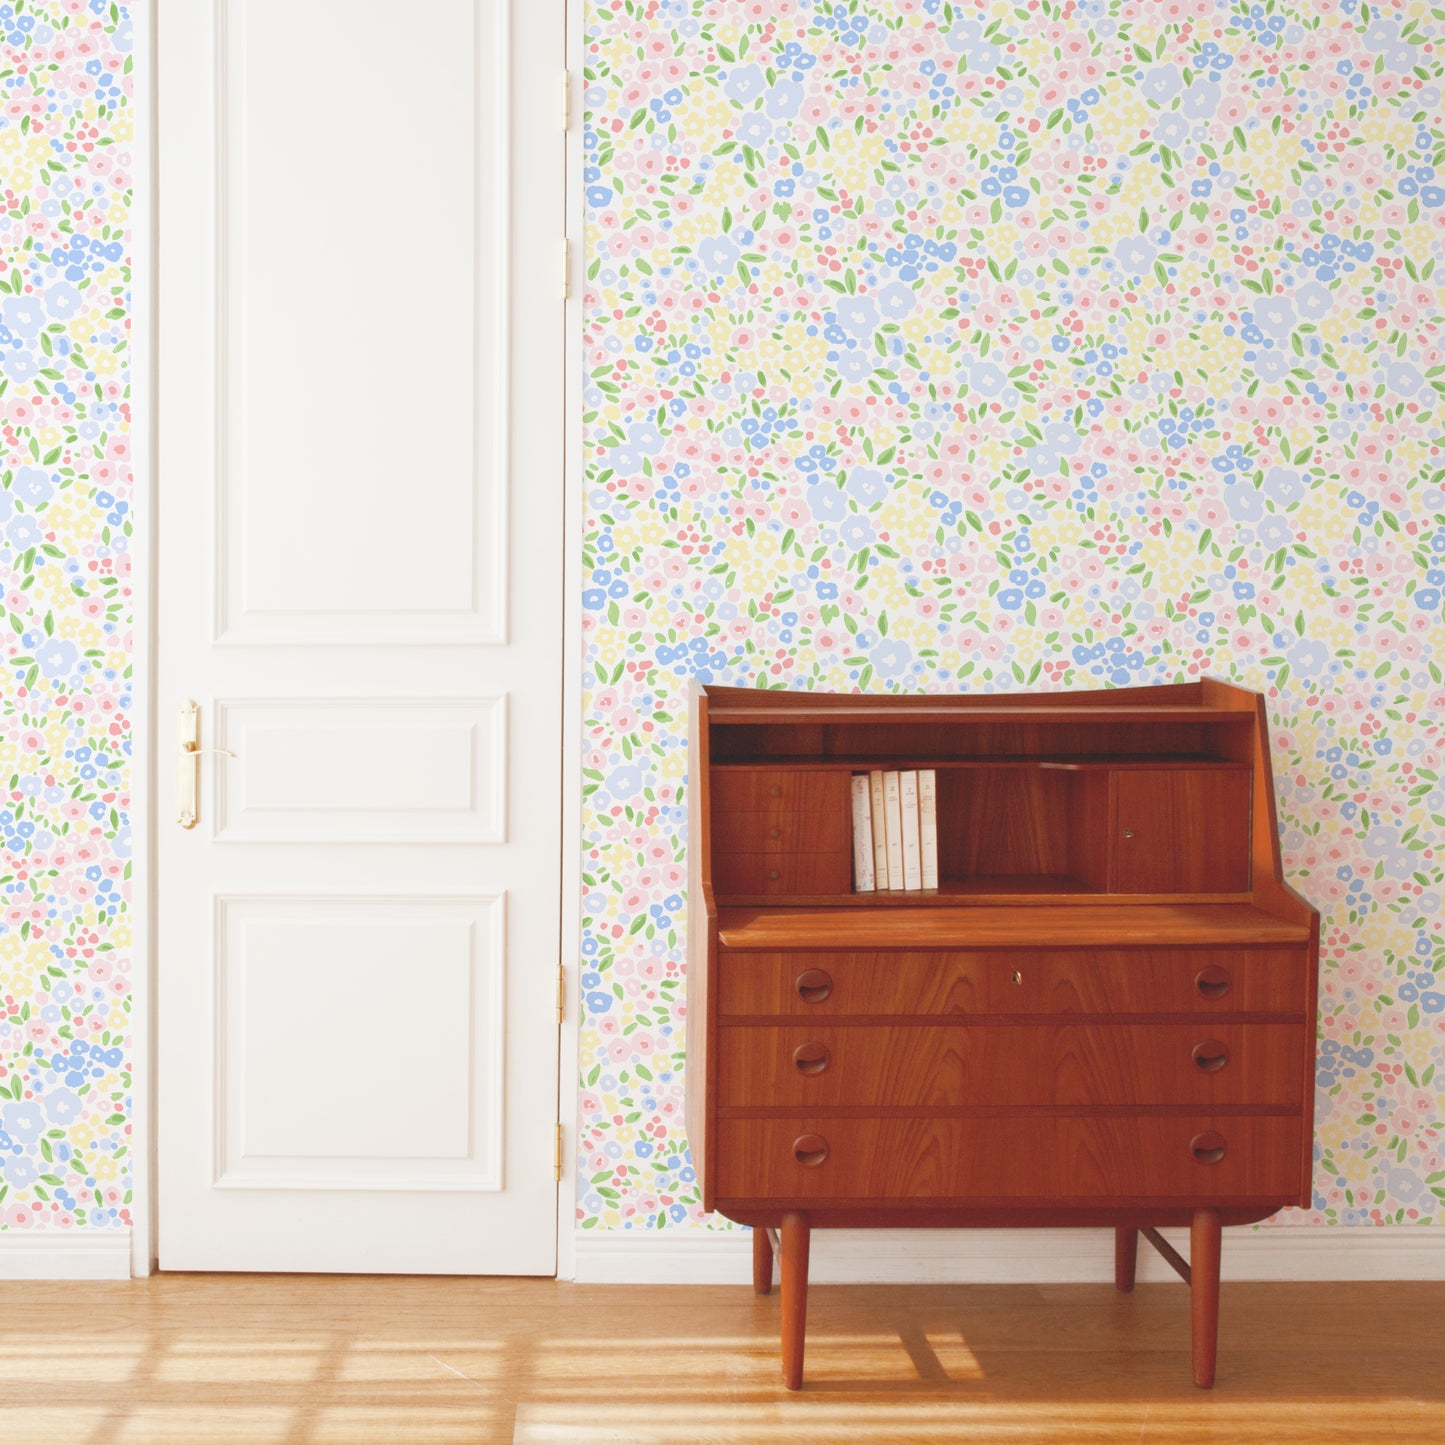 colorful floral self adhesive wallpaper for nursery